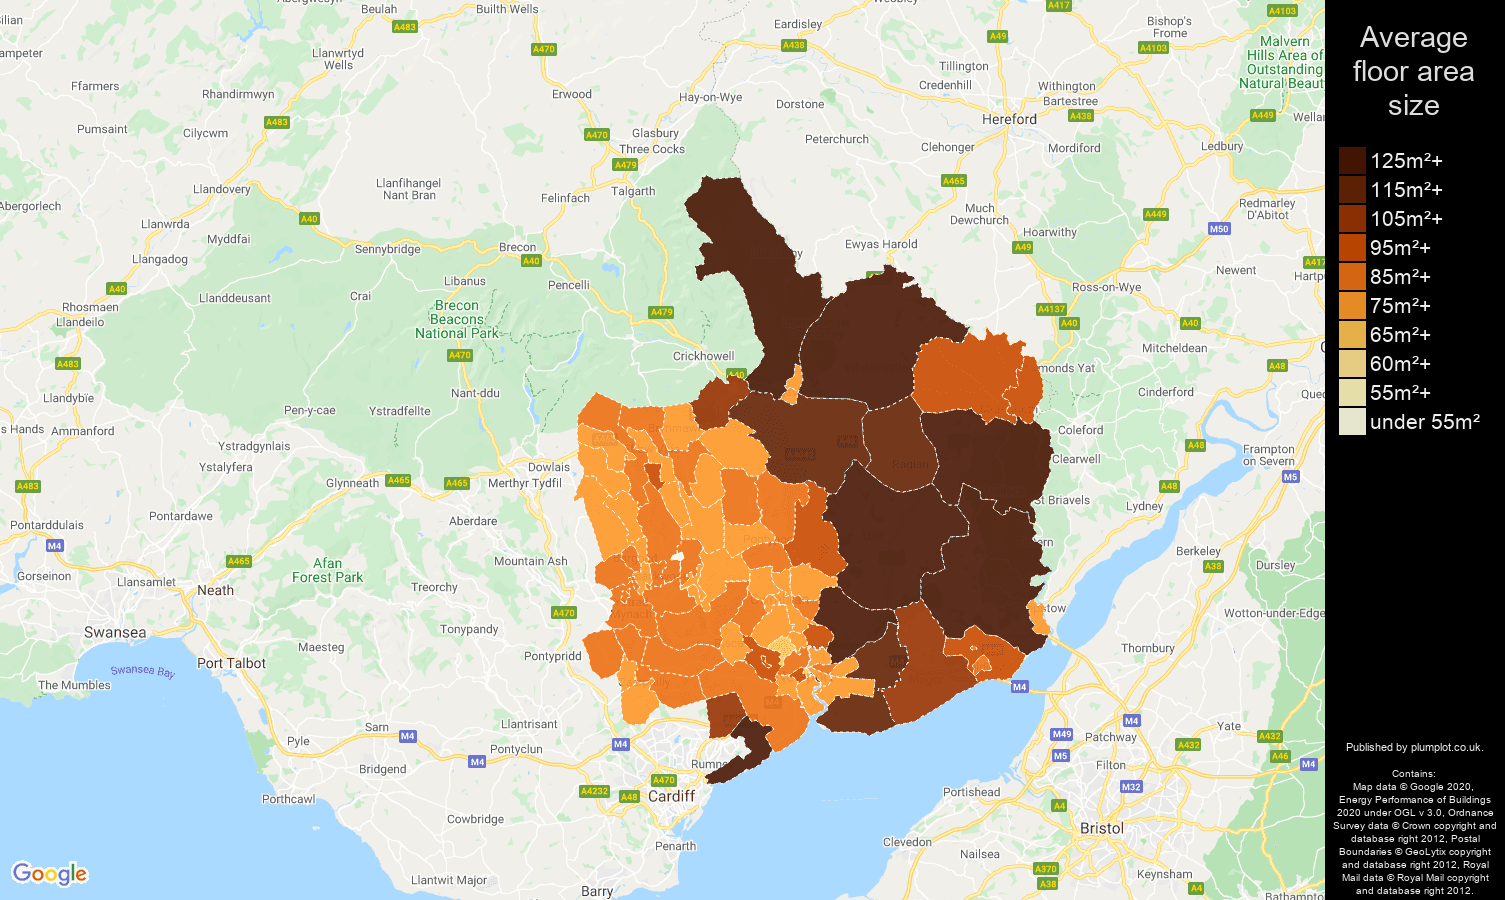 Gwent map of average floor area size of properties